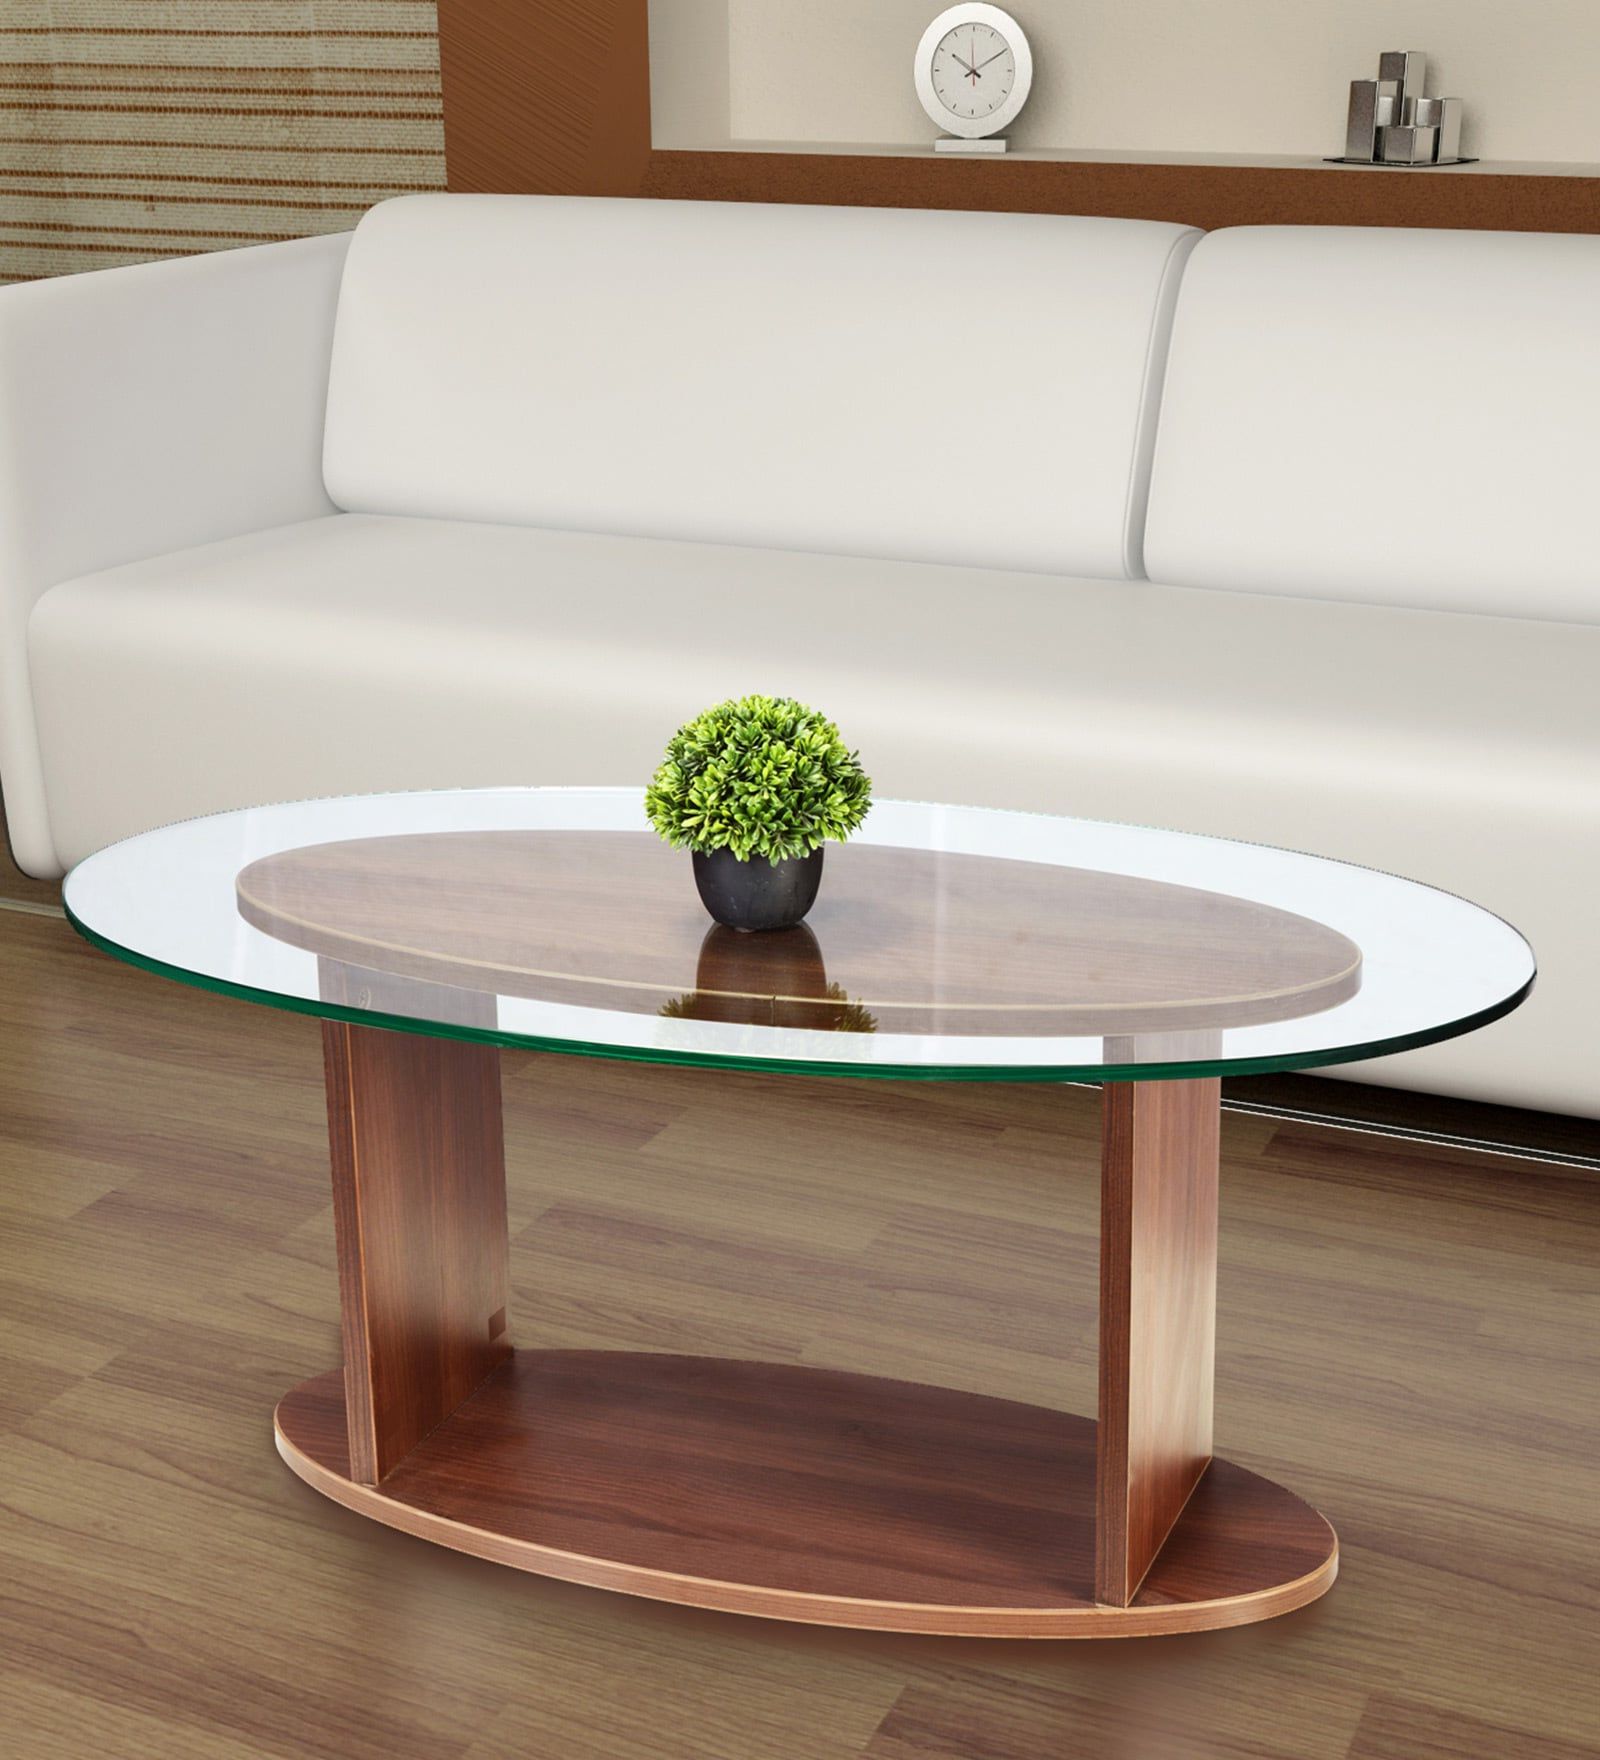 Buy Oval Shaped Glass Top Coffee Table In Walnut Finishaddy Design With Most Current Glass Top Coffee Tables (View 3 of 15)